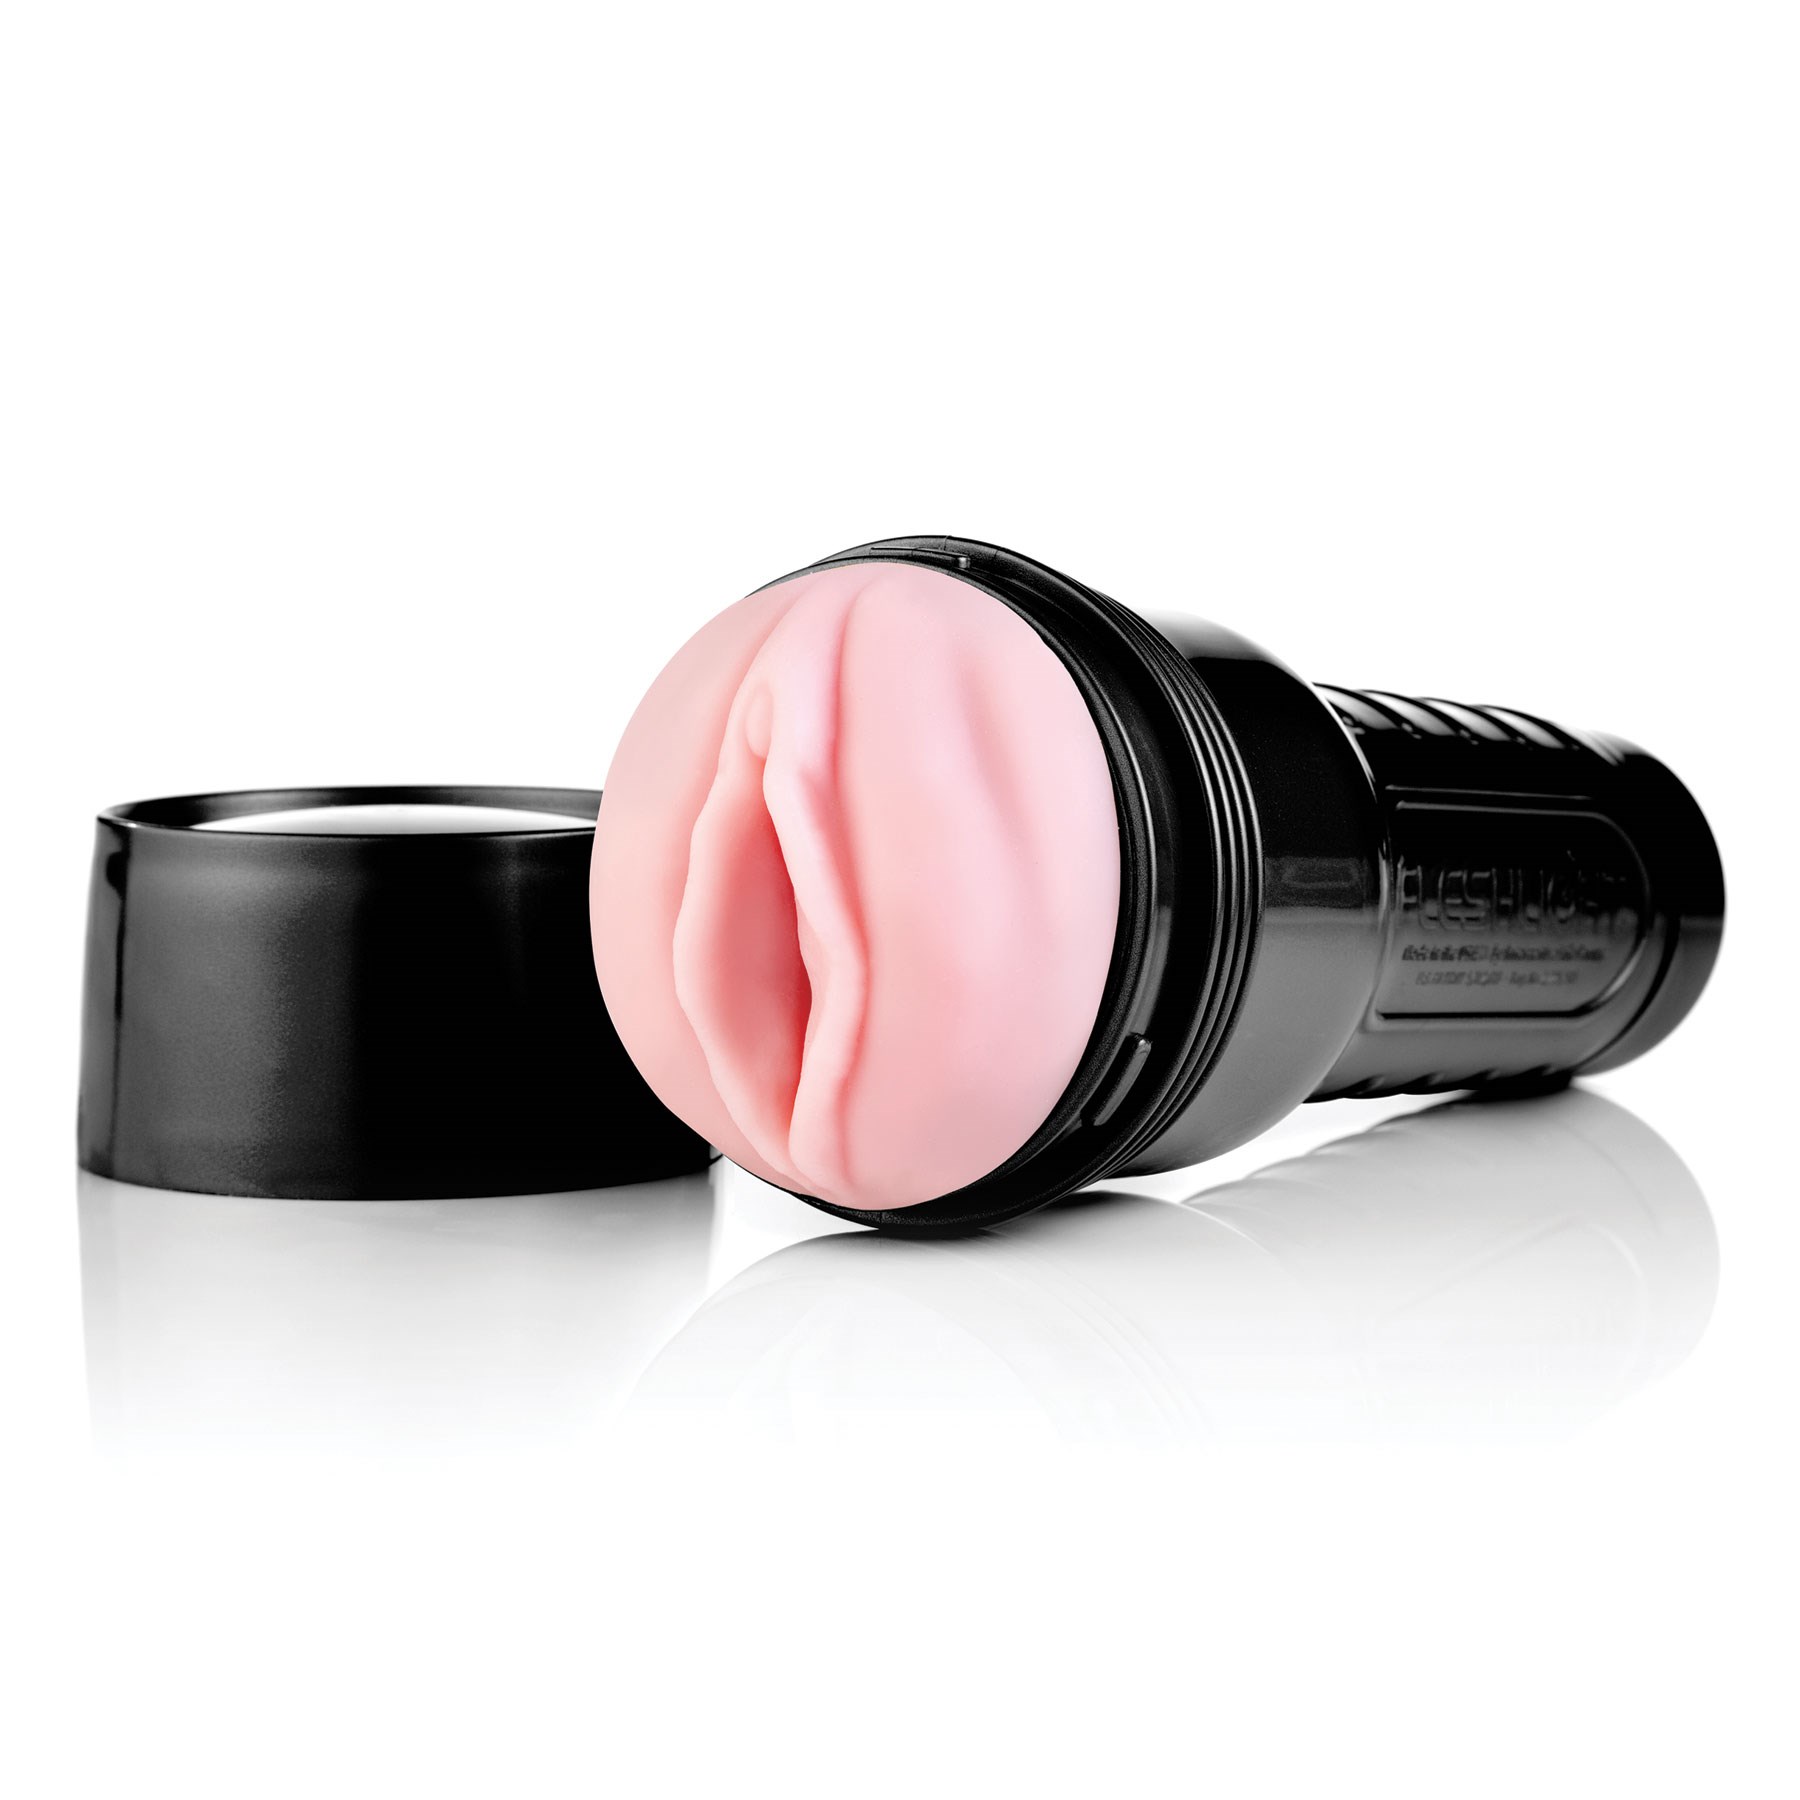 Fleshlight Original Pink Lady with lid off